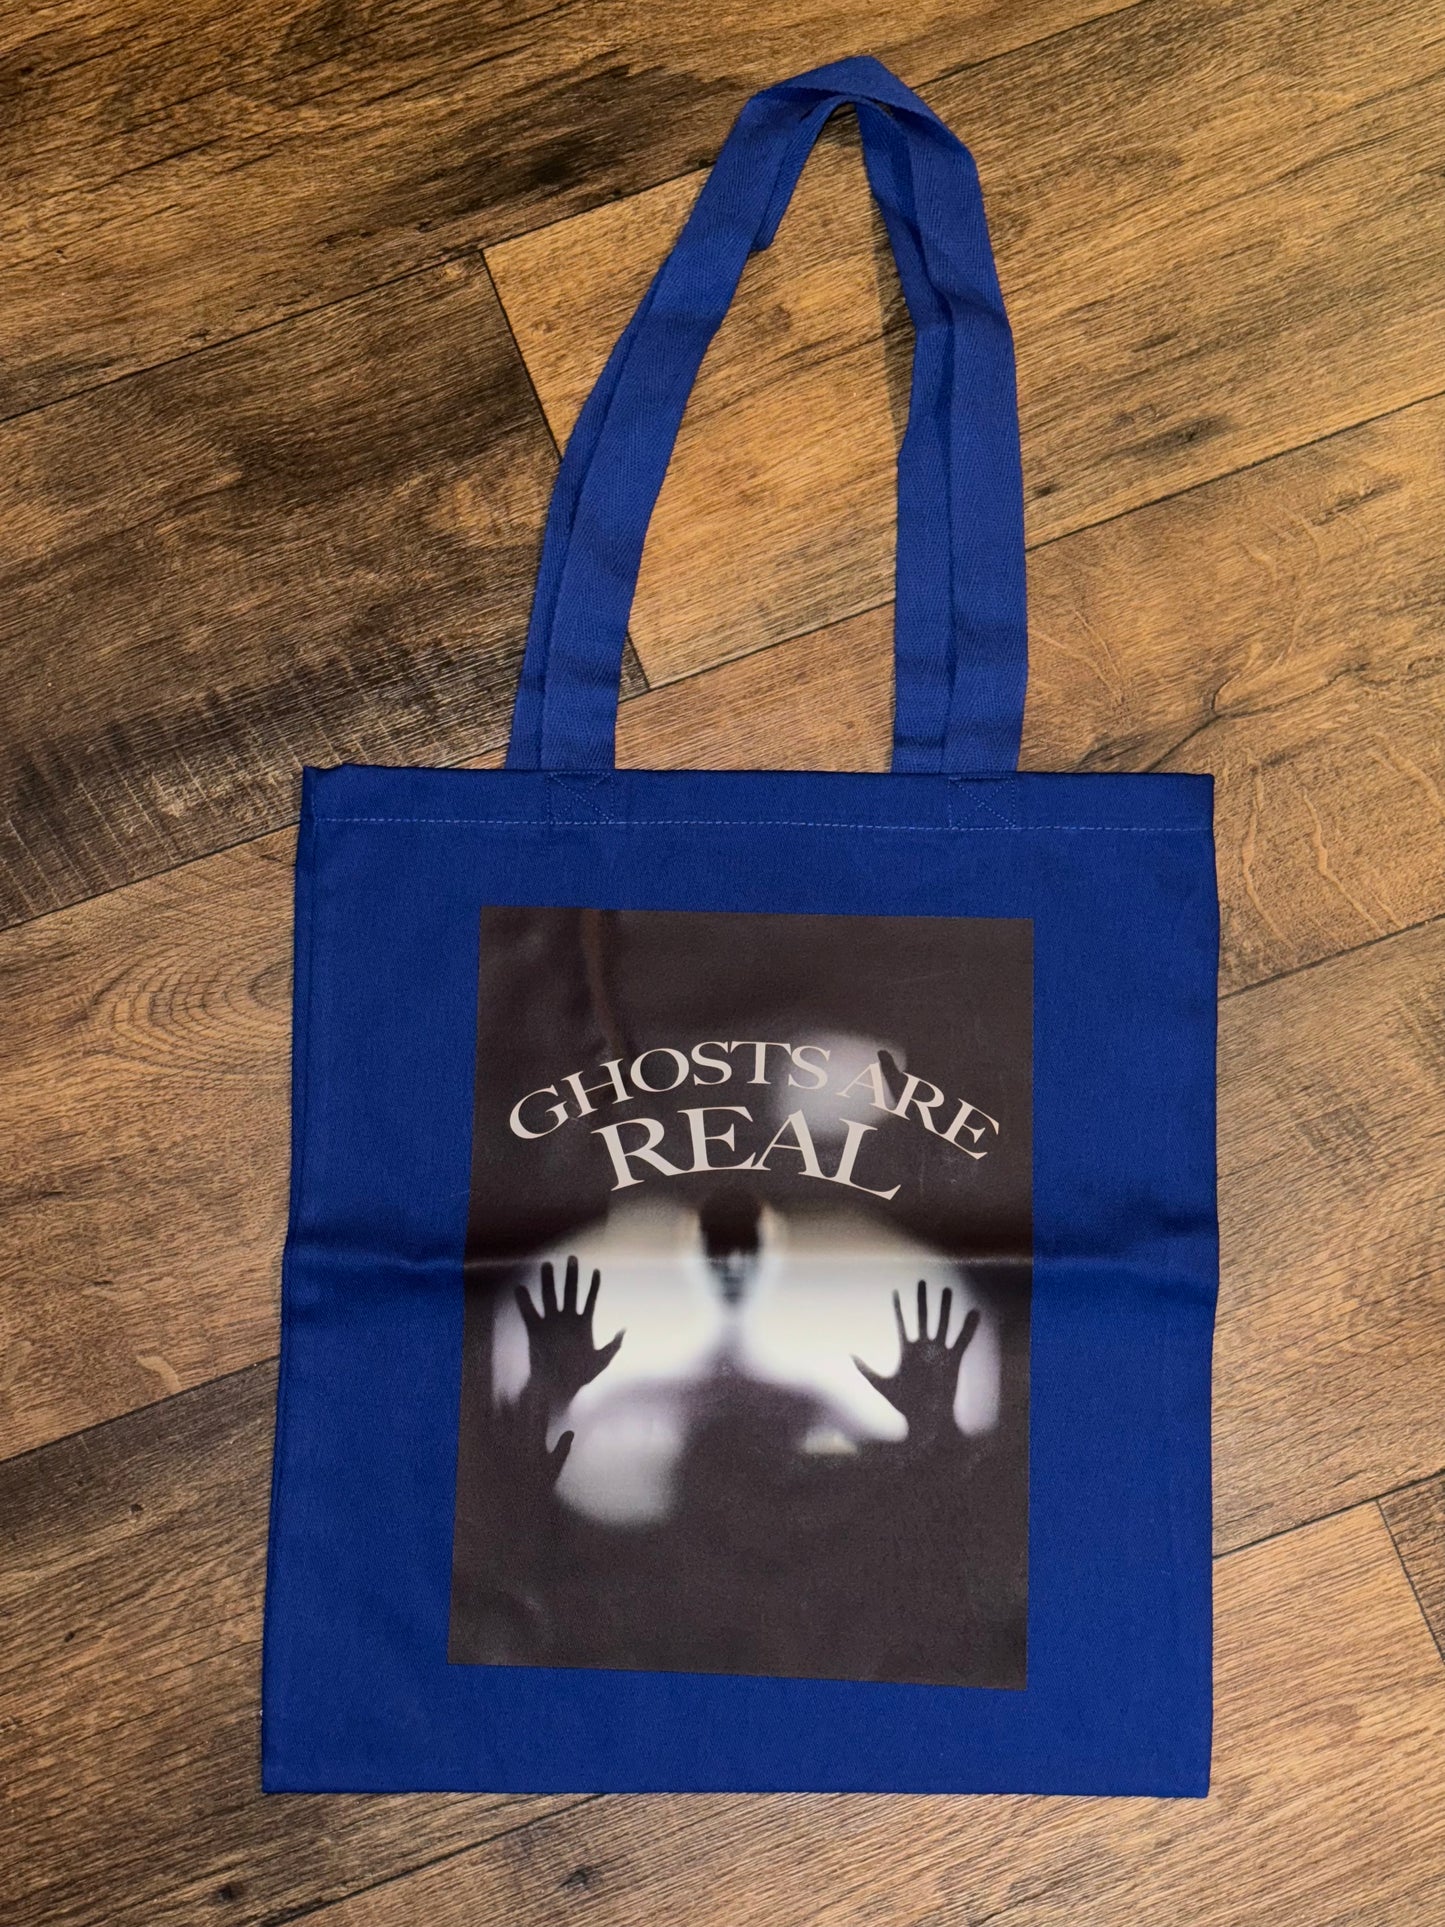 Creepy Ghost Are Real Tote Bag